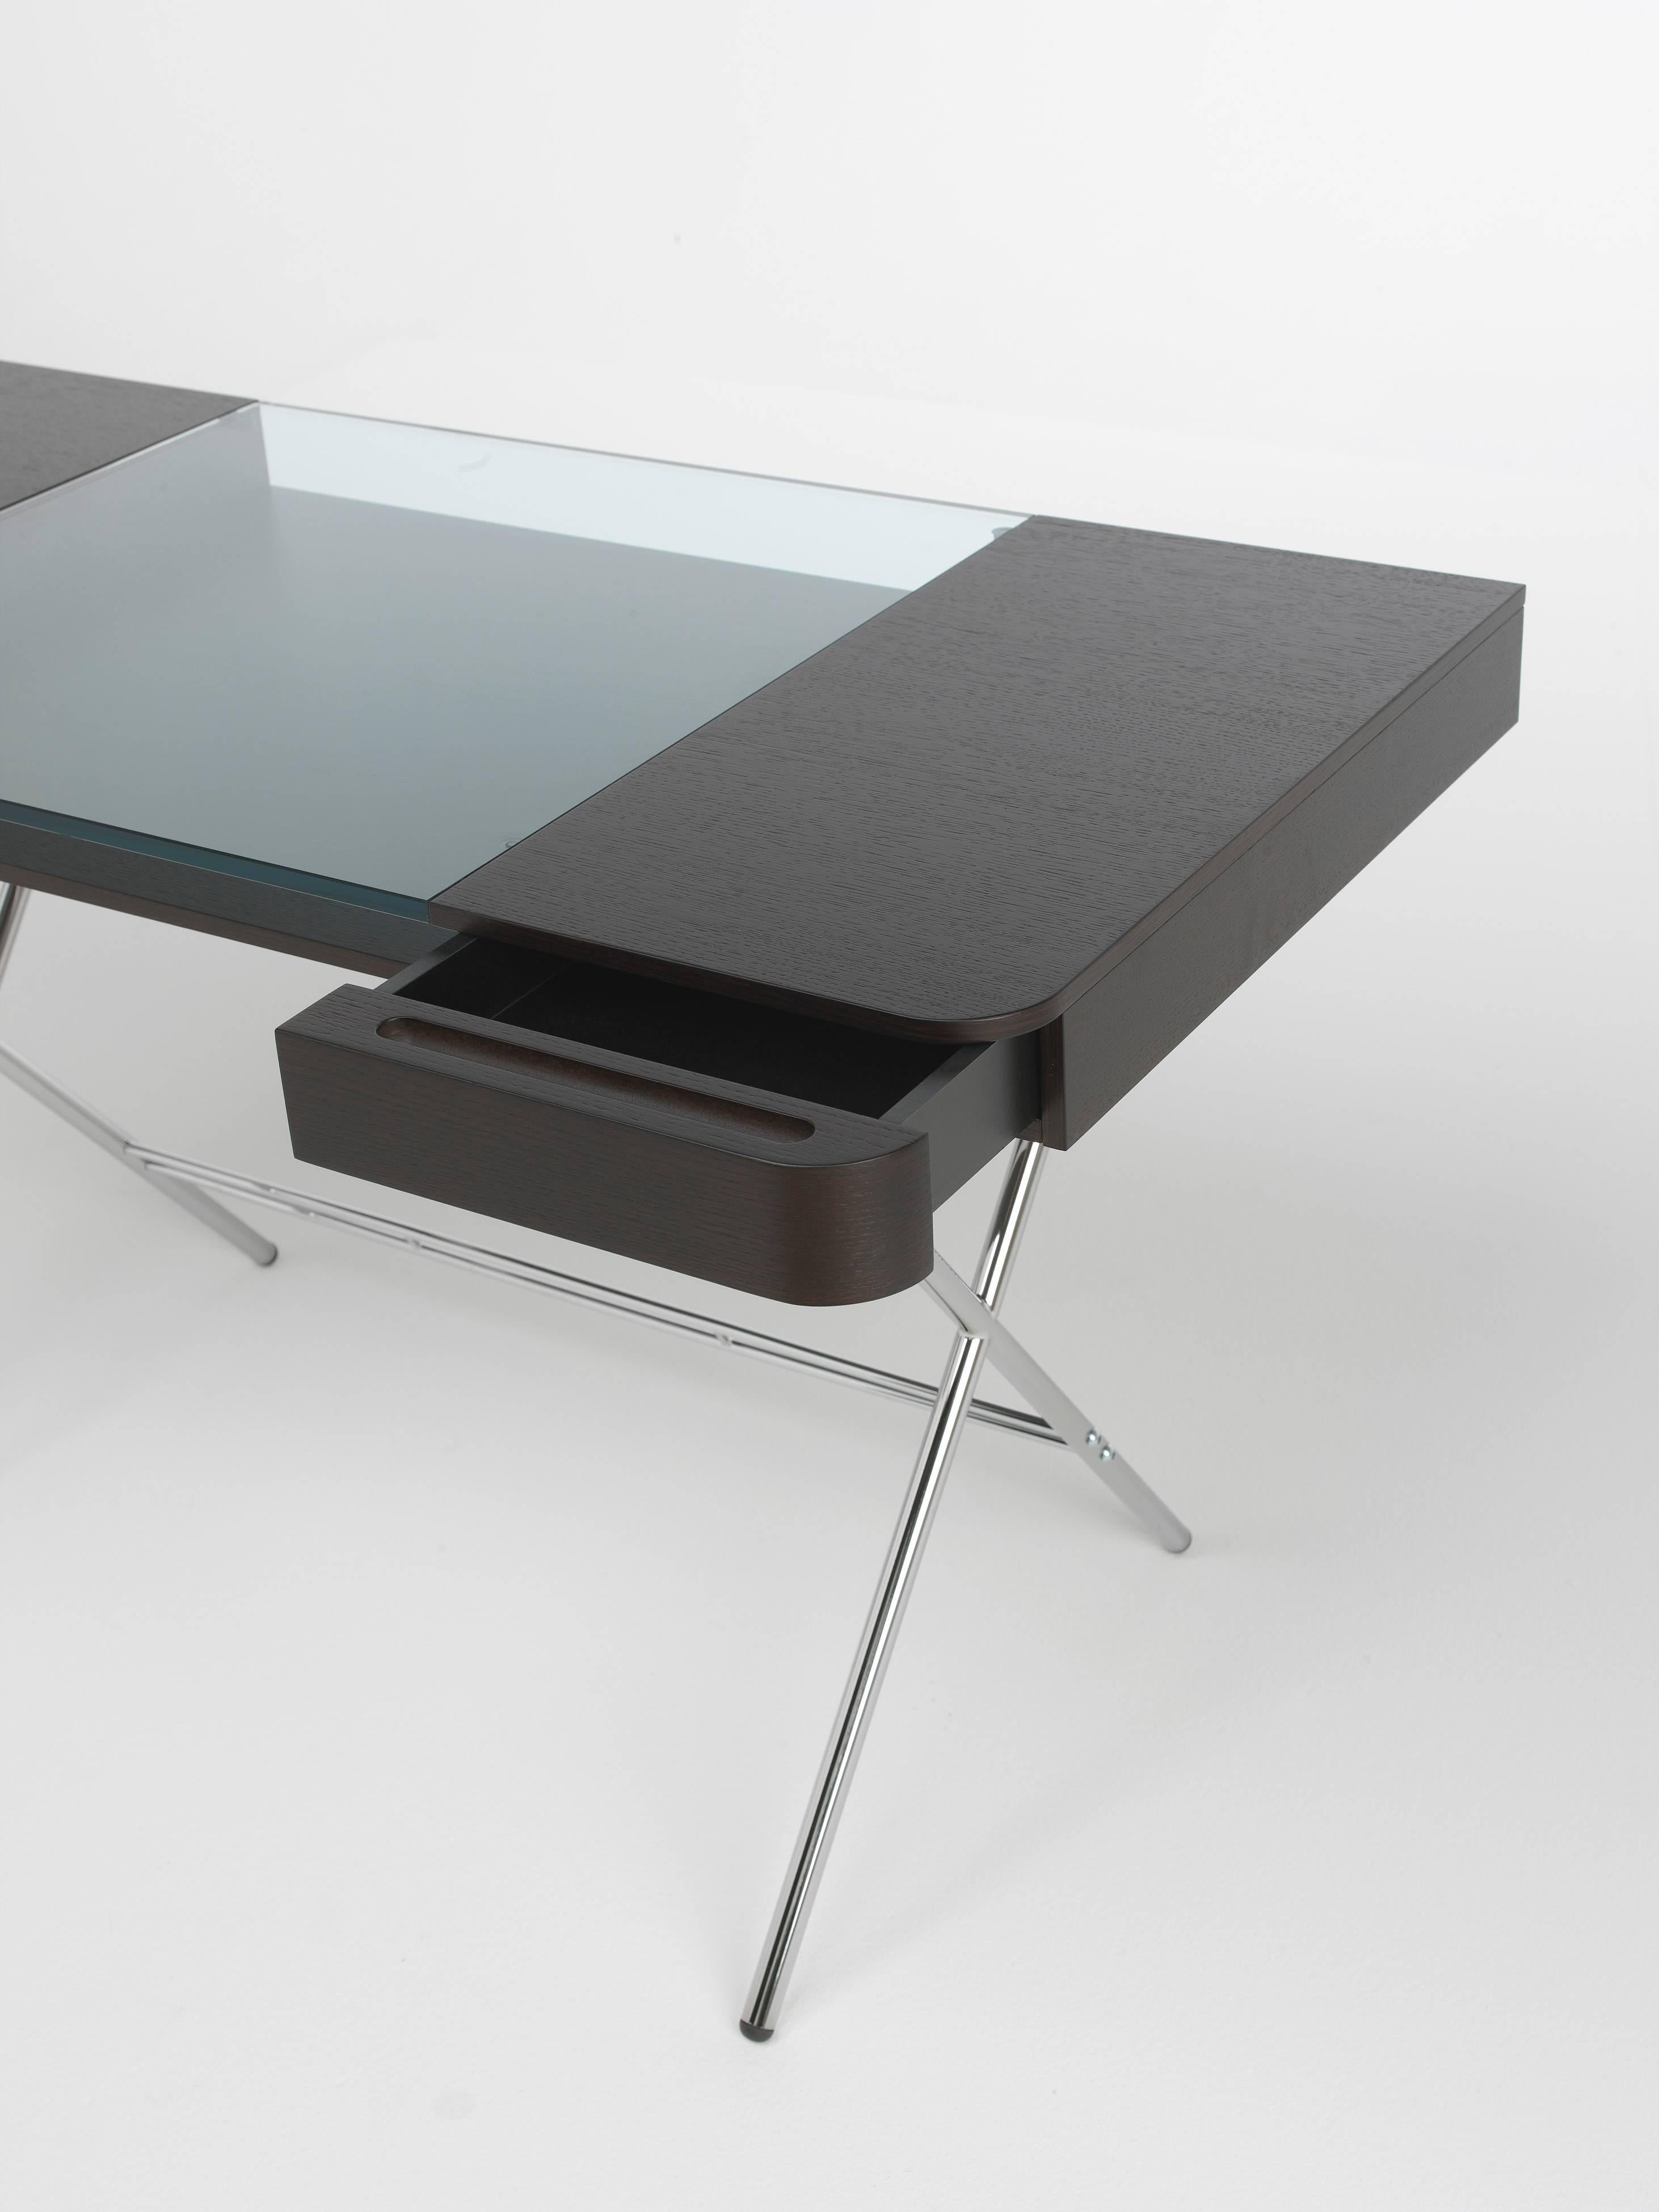 Modern Contemporary Cosimo Desk by Marco Zanuso Jr. With Wenge Stained Oak Veneer Top For Sale